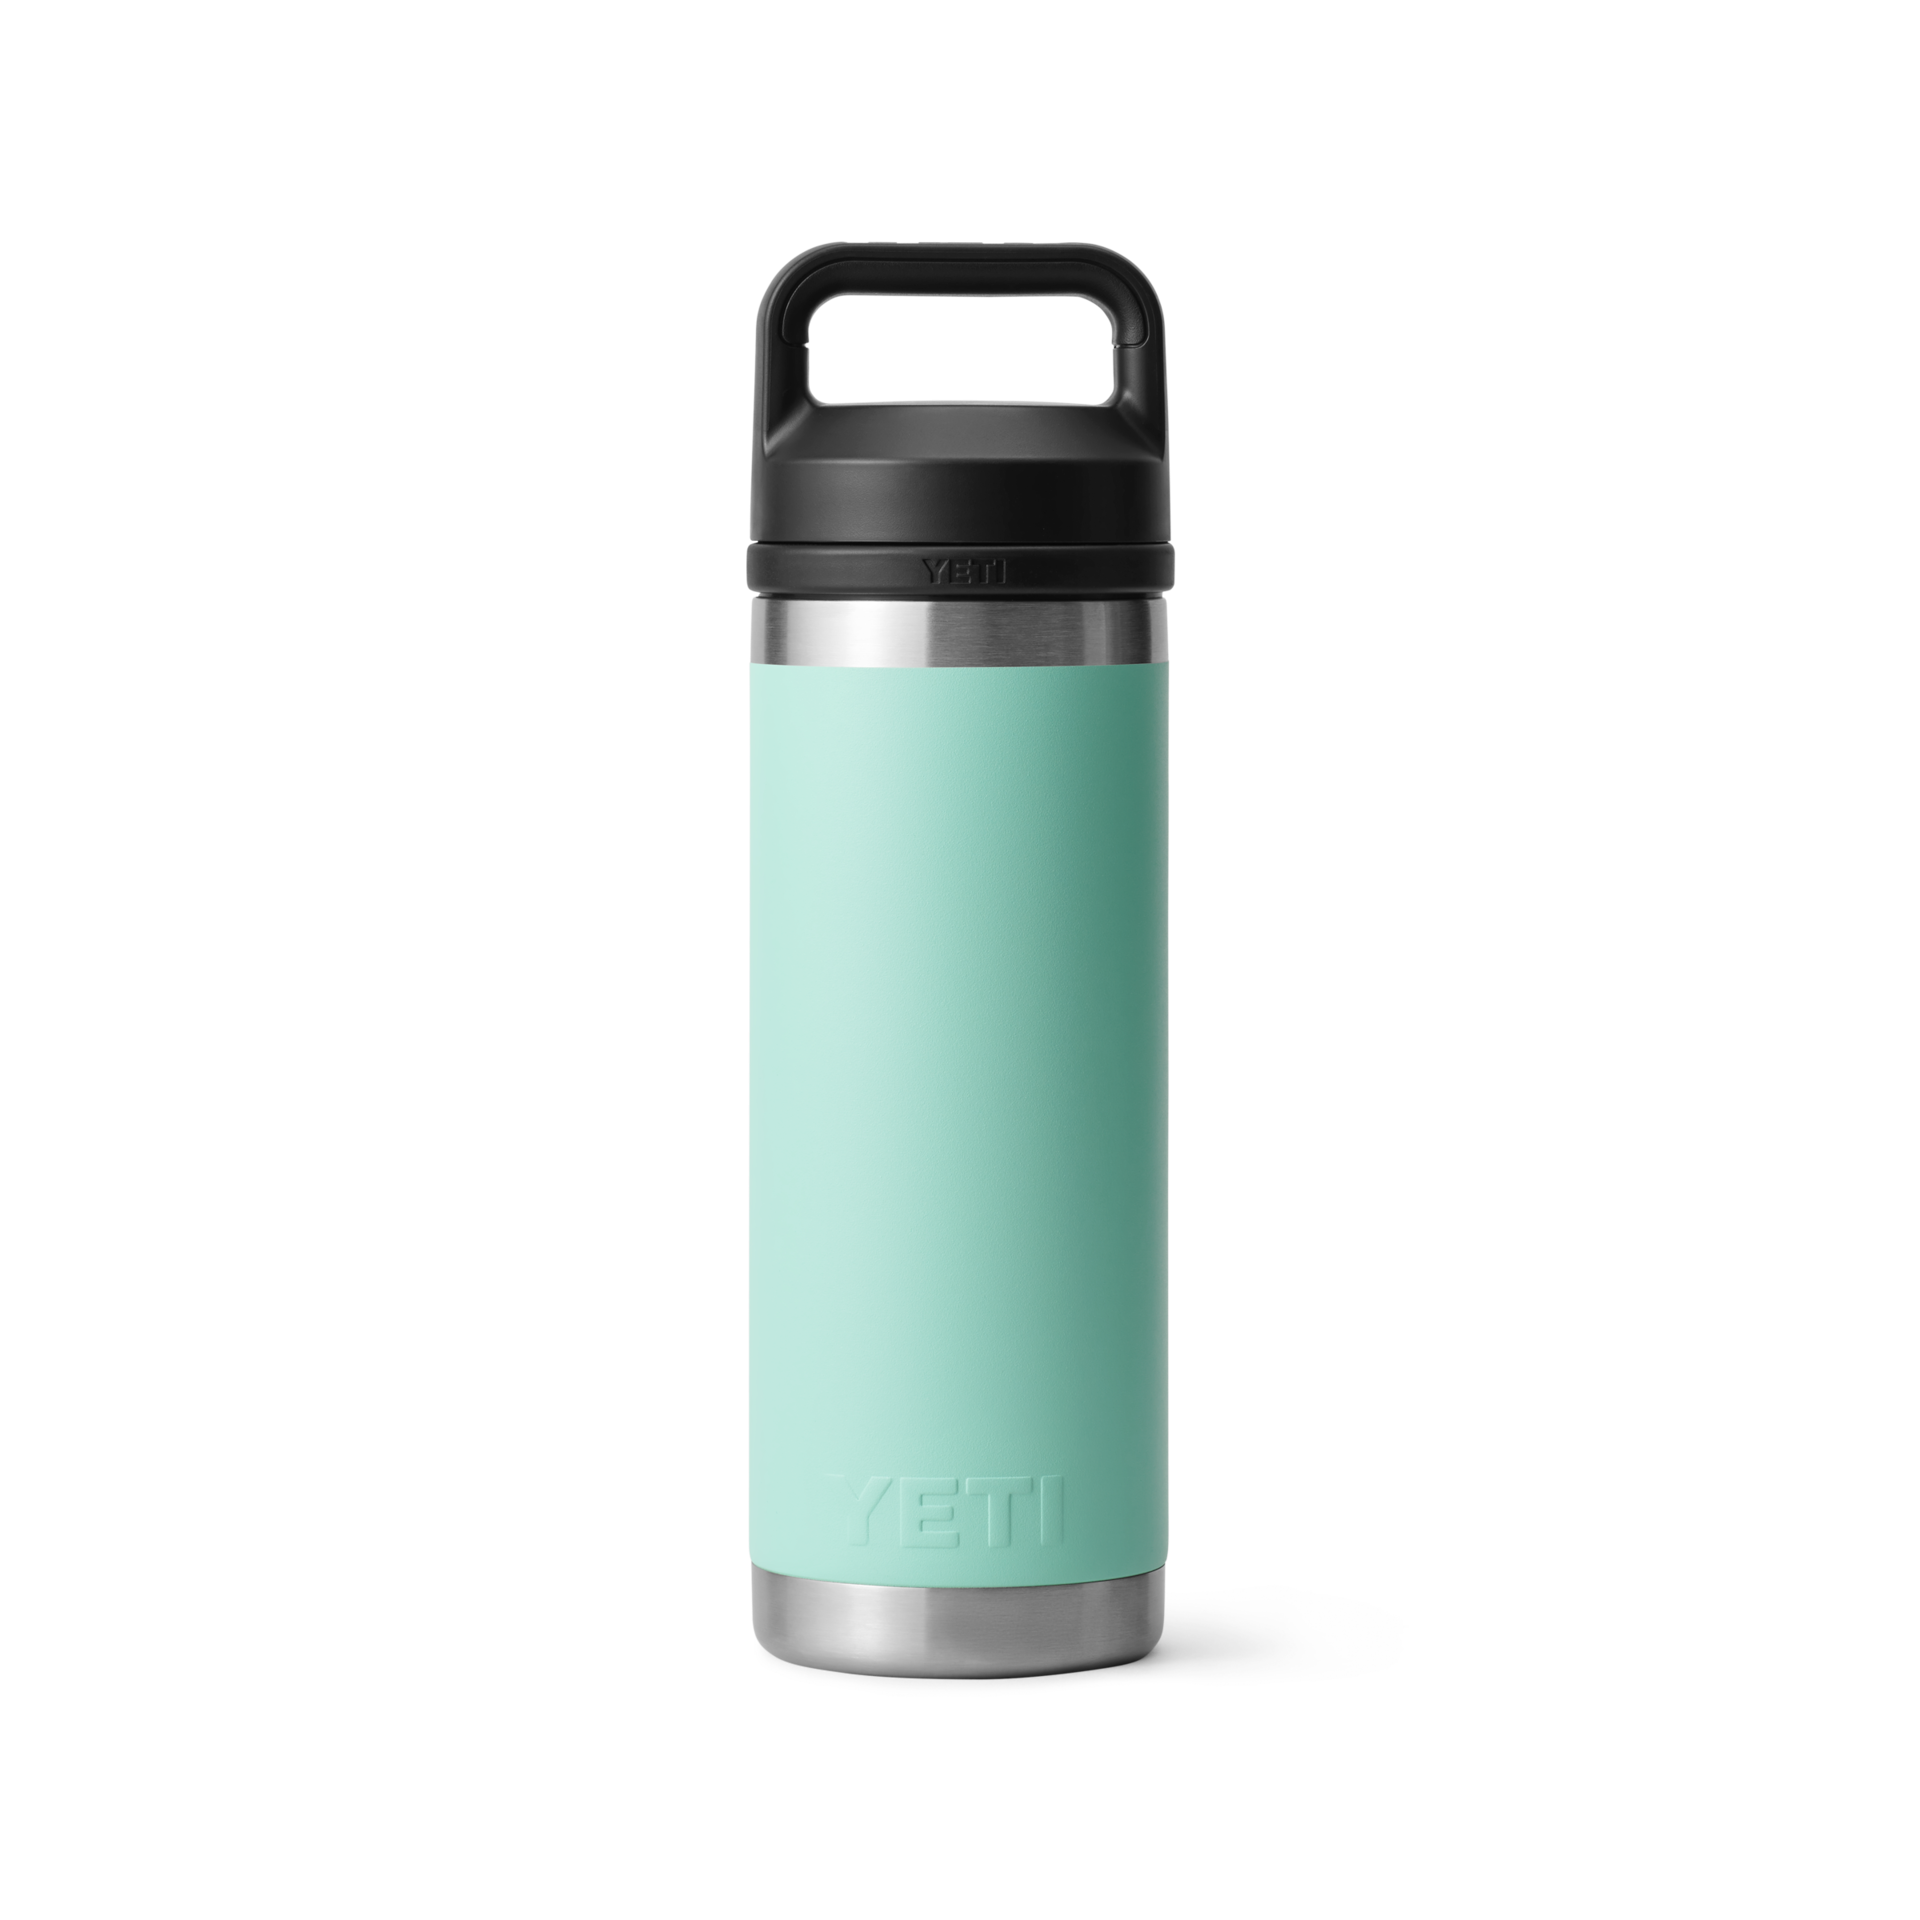 Under Armour Beyond 18 Ounce Stainless Steel Water Bottle, Matte